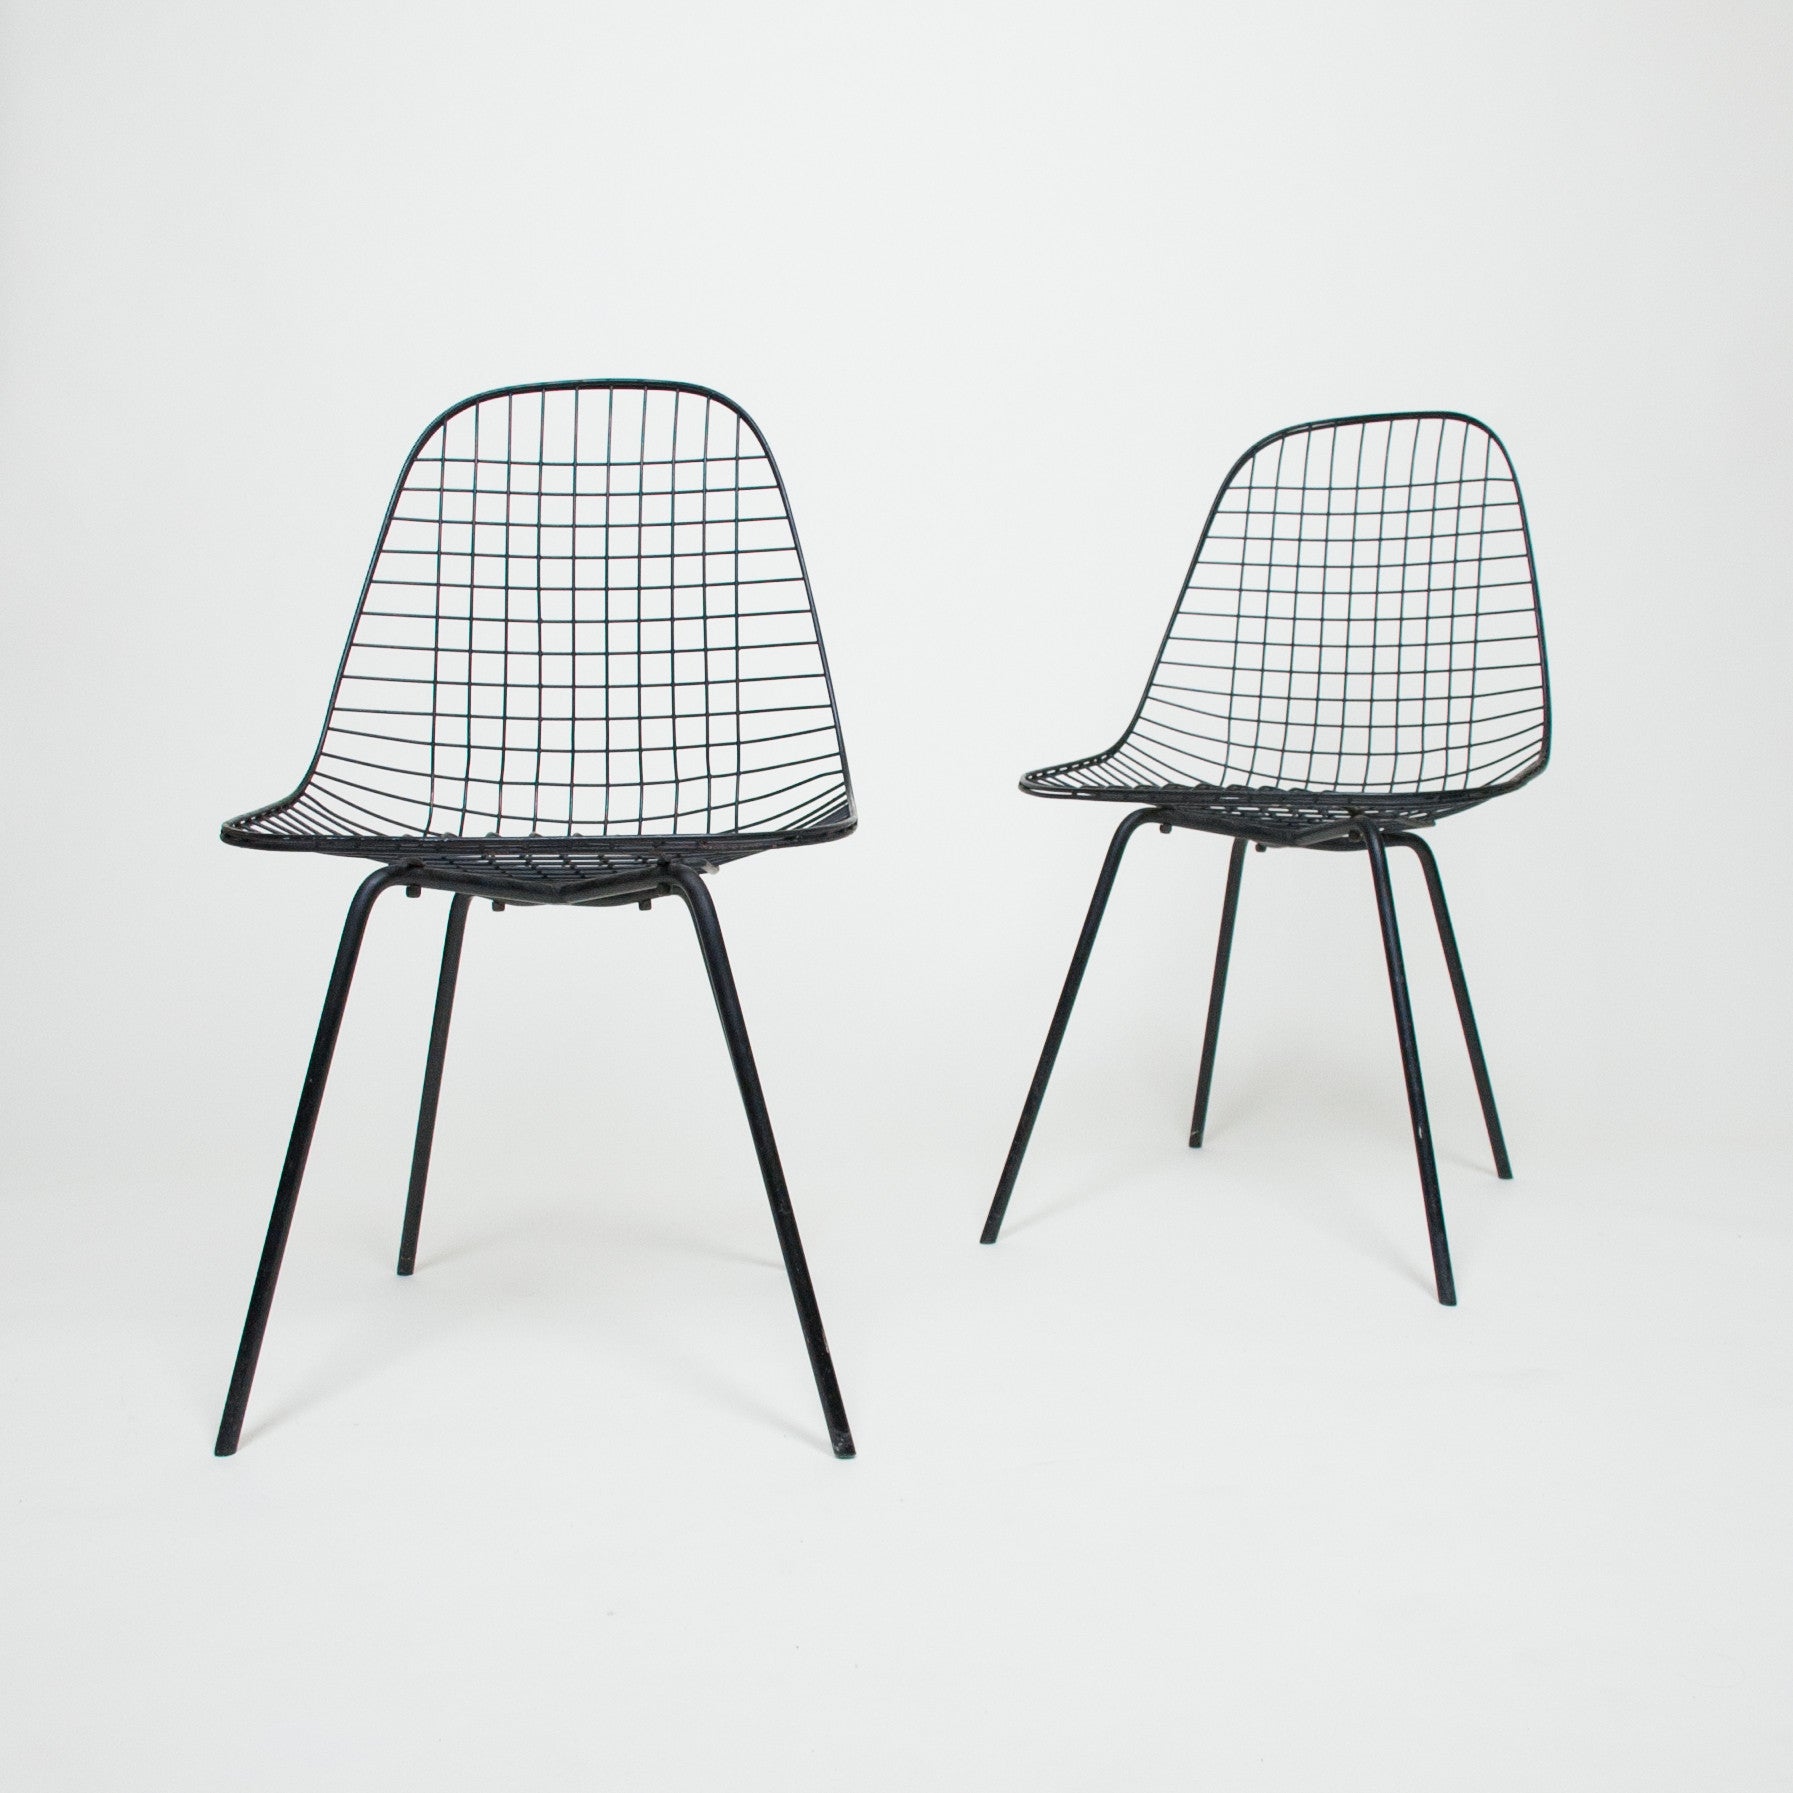 SOLD Early 1950’s Herman Miller DKX Eames X Base Wire Chairs Original (Set Of 2)